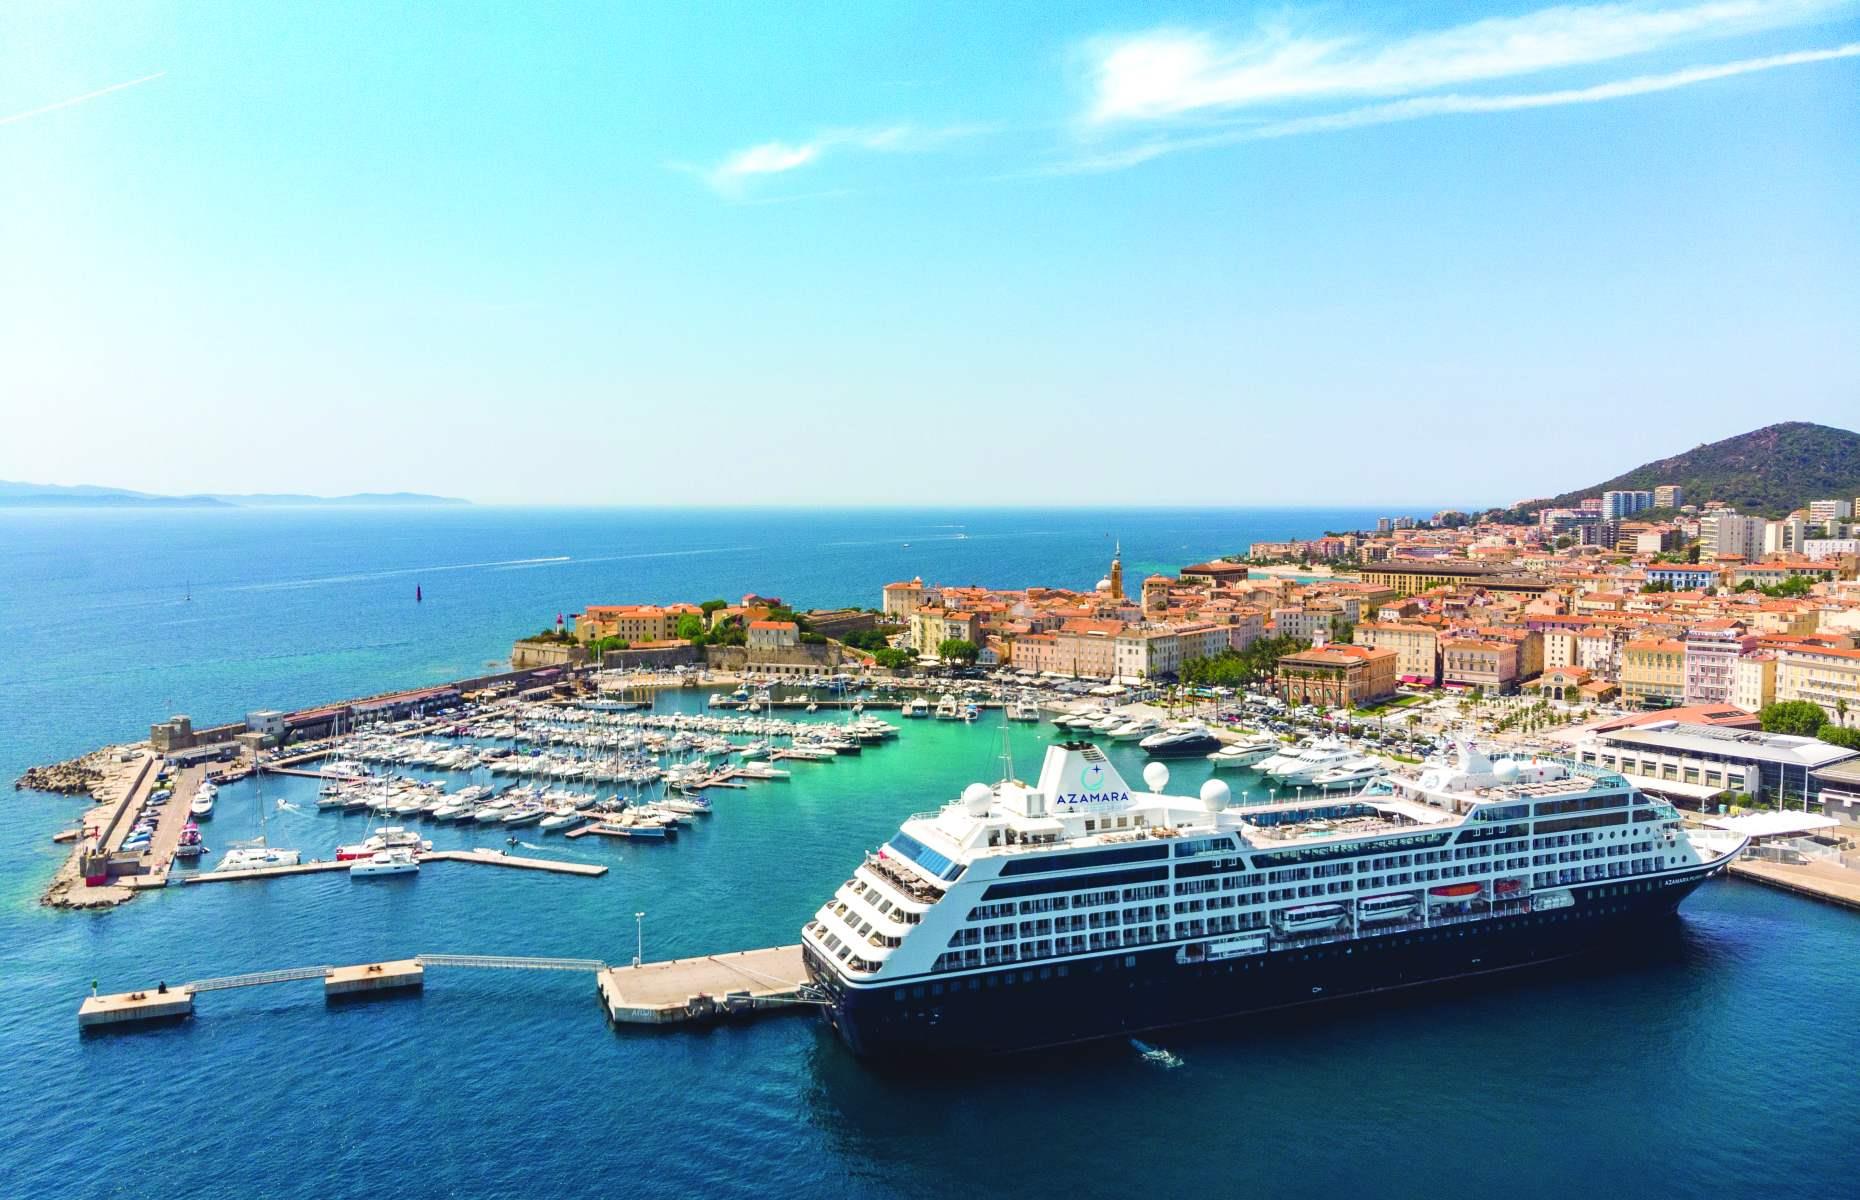 <p>If you’re planning on a bucket list-worthy sailing on one of the more luxurious ships, you’ll need to bag your spot early on. Take <a href="https://www.azamara.co.uk/?cid=aza_lead_b_bps_aim_goo_brandukhomepage_1102023_RSA&_aiid=14641&teng=go&beng=b&deng=c&keng=azamara%20cruise&meng=p&peng=&ieng=144707013083&kieng=kwd-4302615276&cieng=644377036482&cpieng=19539984873&feng=&cleng=CjwKCAiAzp6eBhByEiwA_gGq5CCdc3x4MsVRS4UsixbLvRgN6rvTlkDVWGSH47Vp0rlChE77cRaIBRoC_lsQAvD_BwE&utm_source=google&utm_medium=cpc&utm_campaign=Azamara-UK-Search-Brand">Azamara’s World Voyage</a>, a 155-night, 37-country sailing which takes place in 2024 and is currently sold out (there’s a waiting list of passengers hoping for cancellations). Luckily, spots on the 2025 World Voyage are still available – if you’ve got a minimum of £34,500 ($42,622) to spare.</p>  <p><a href="https://www.loveexploring.com/galleries/133059/the-worlds-most-beautiful-ports-visited-by-cruise-ships?page=1"><strong>The world's most beautiful ports visited by cruise ships</strong></a></p>